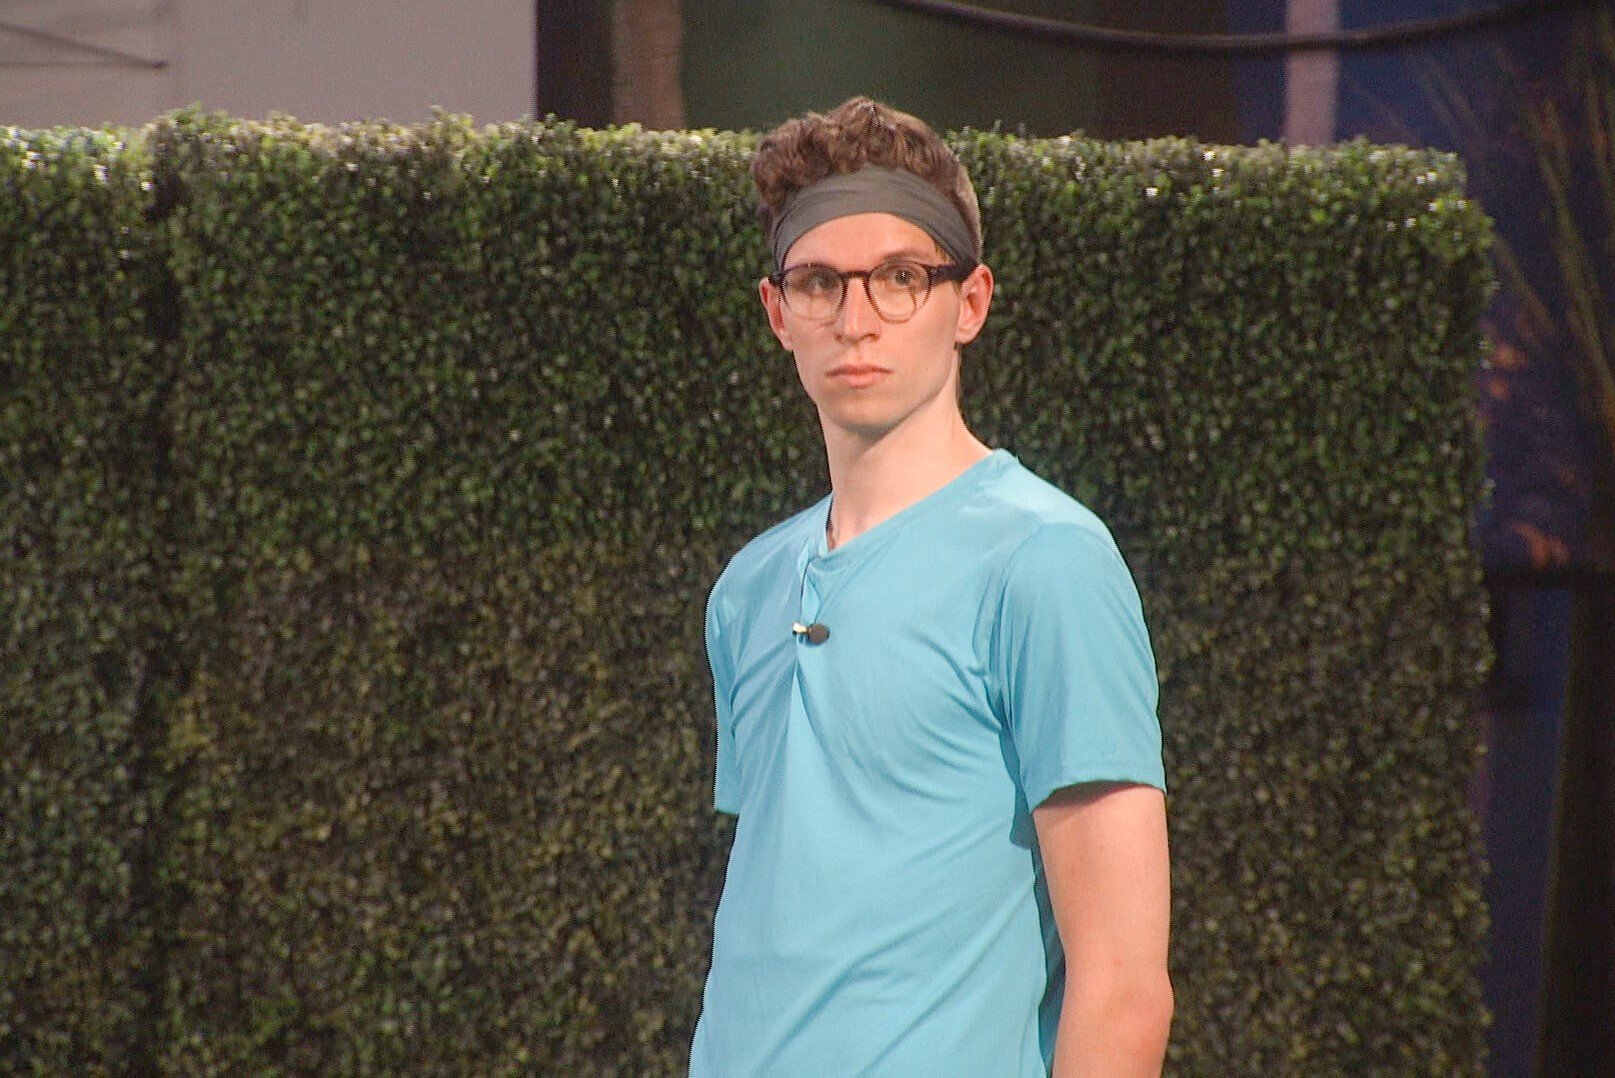 Michael Bruner, who, according to 'Big Brother 24' spoilers, won the Power of Veto in week five, wears a light blue shirt, gray headband, and glasses.